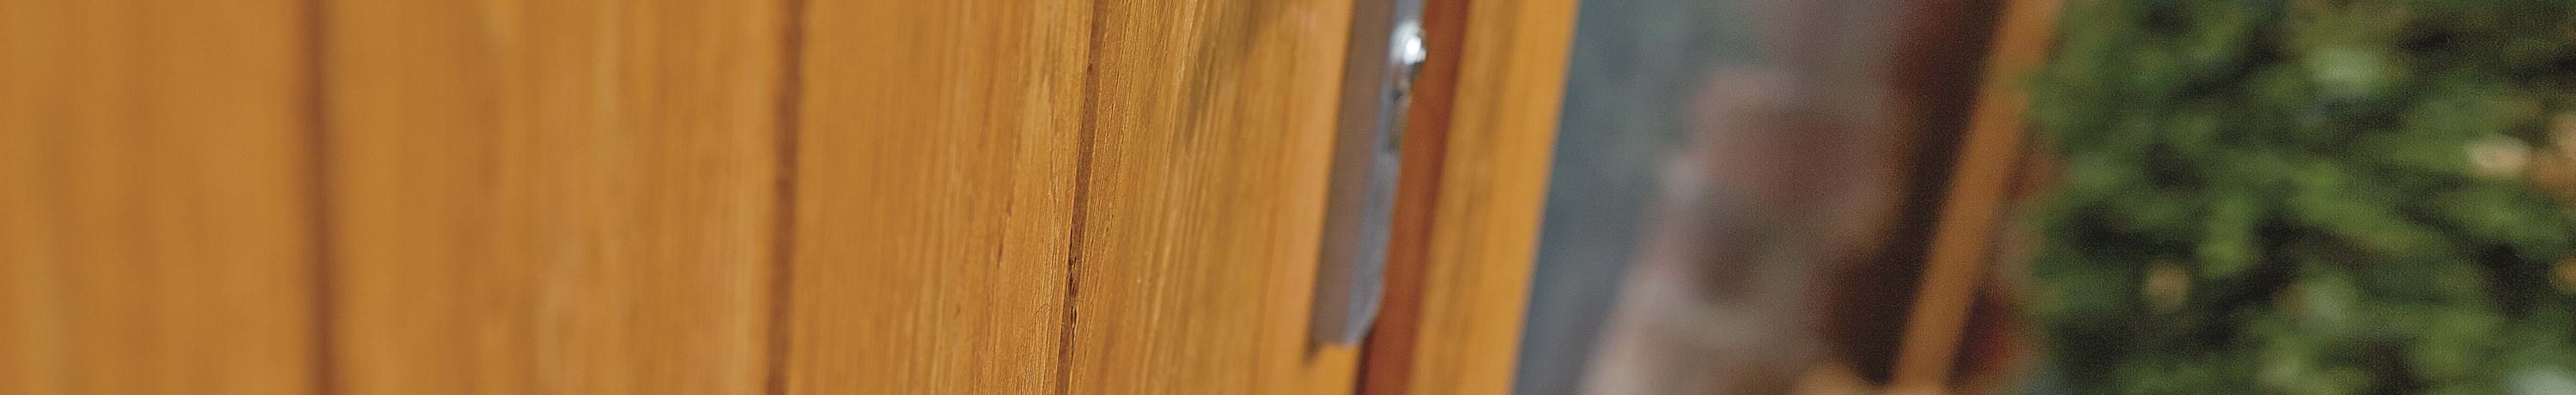 Best way to strip old varnish and stain on wood trim/casing/doors